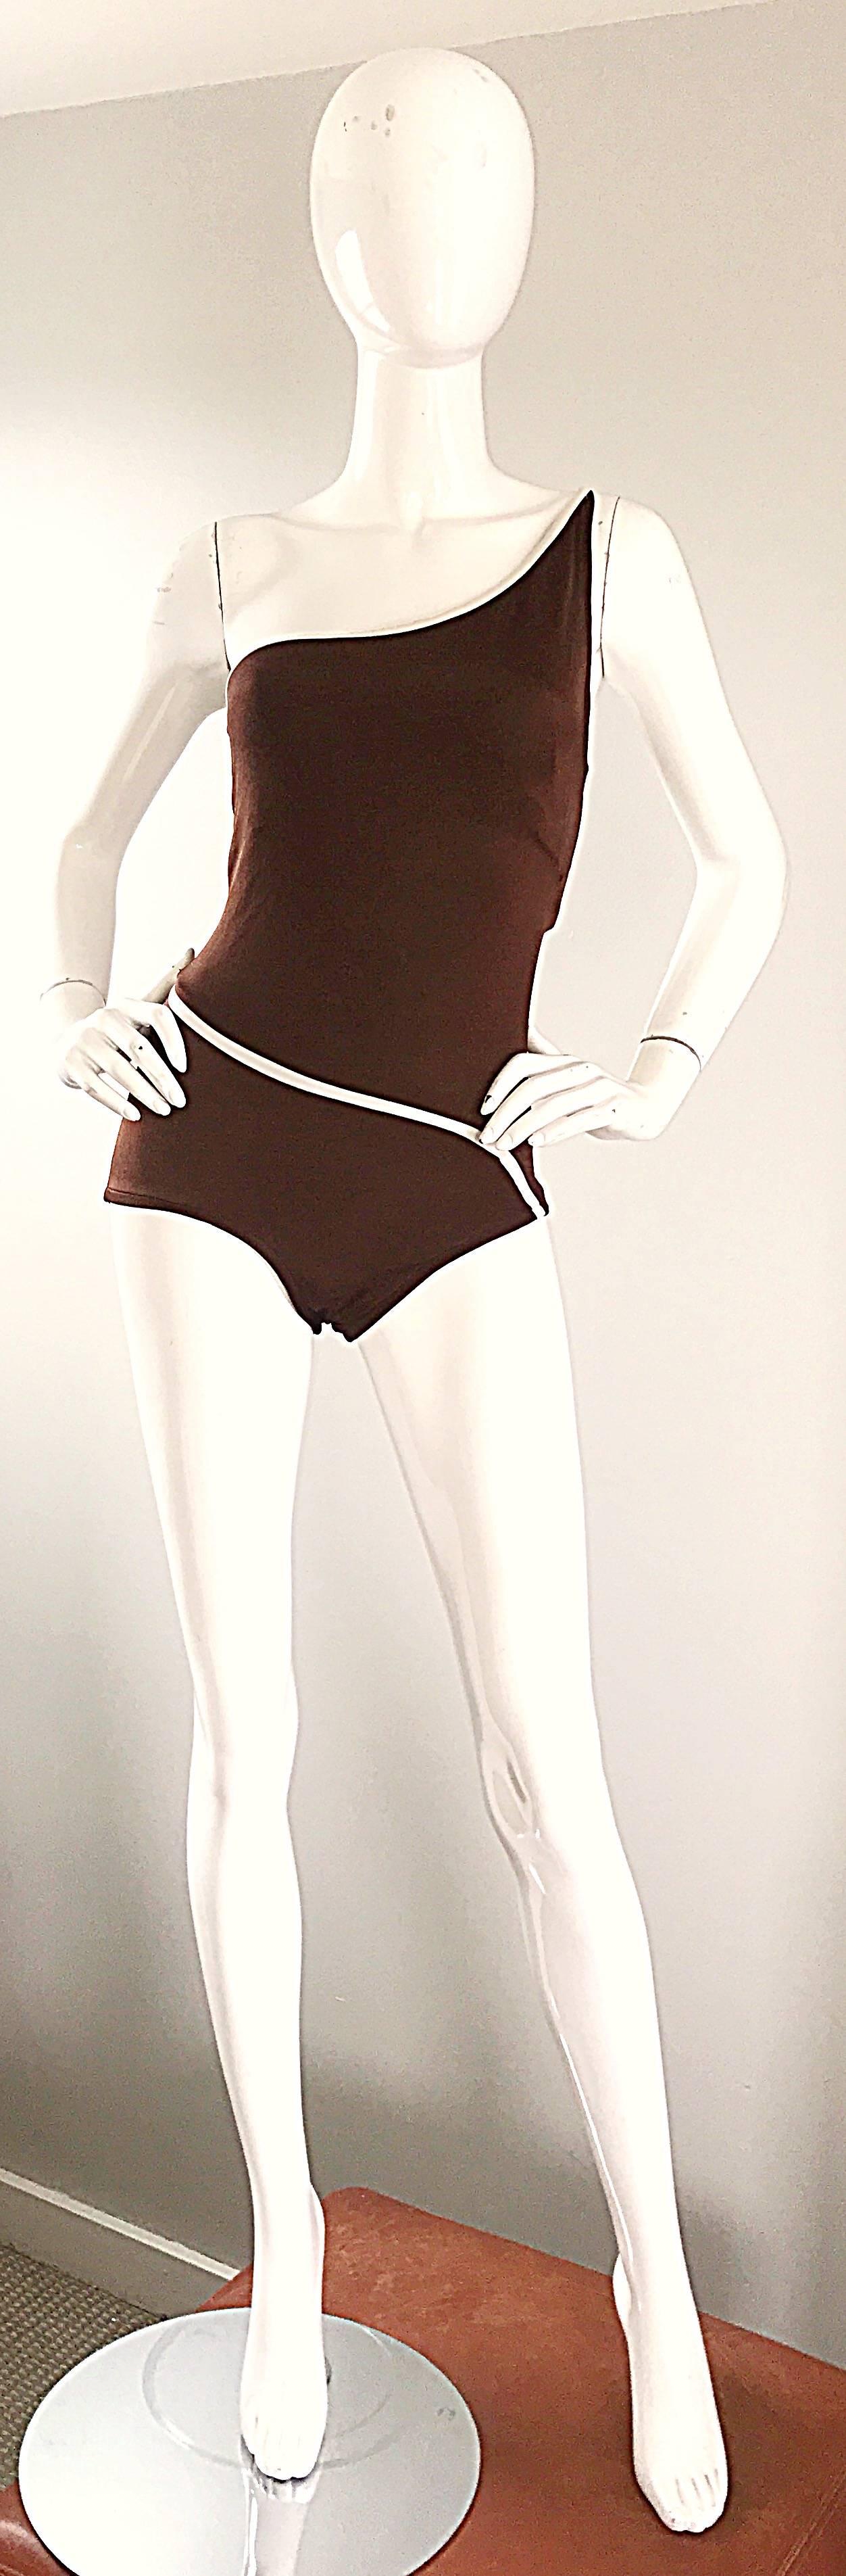 Sexy 70s BILL BLASS chocolate brown and white one shoulder swimsuit or bodysuit! Features a sloped with stripe at waistband, and above the bust. Built in interior support at bust. Great for the beach, pool, or paired with shorts, jeans, or a skirt